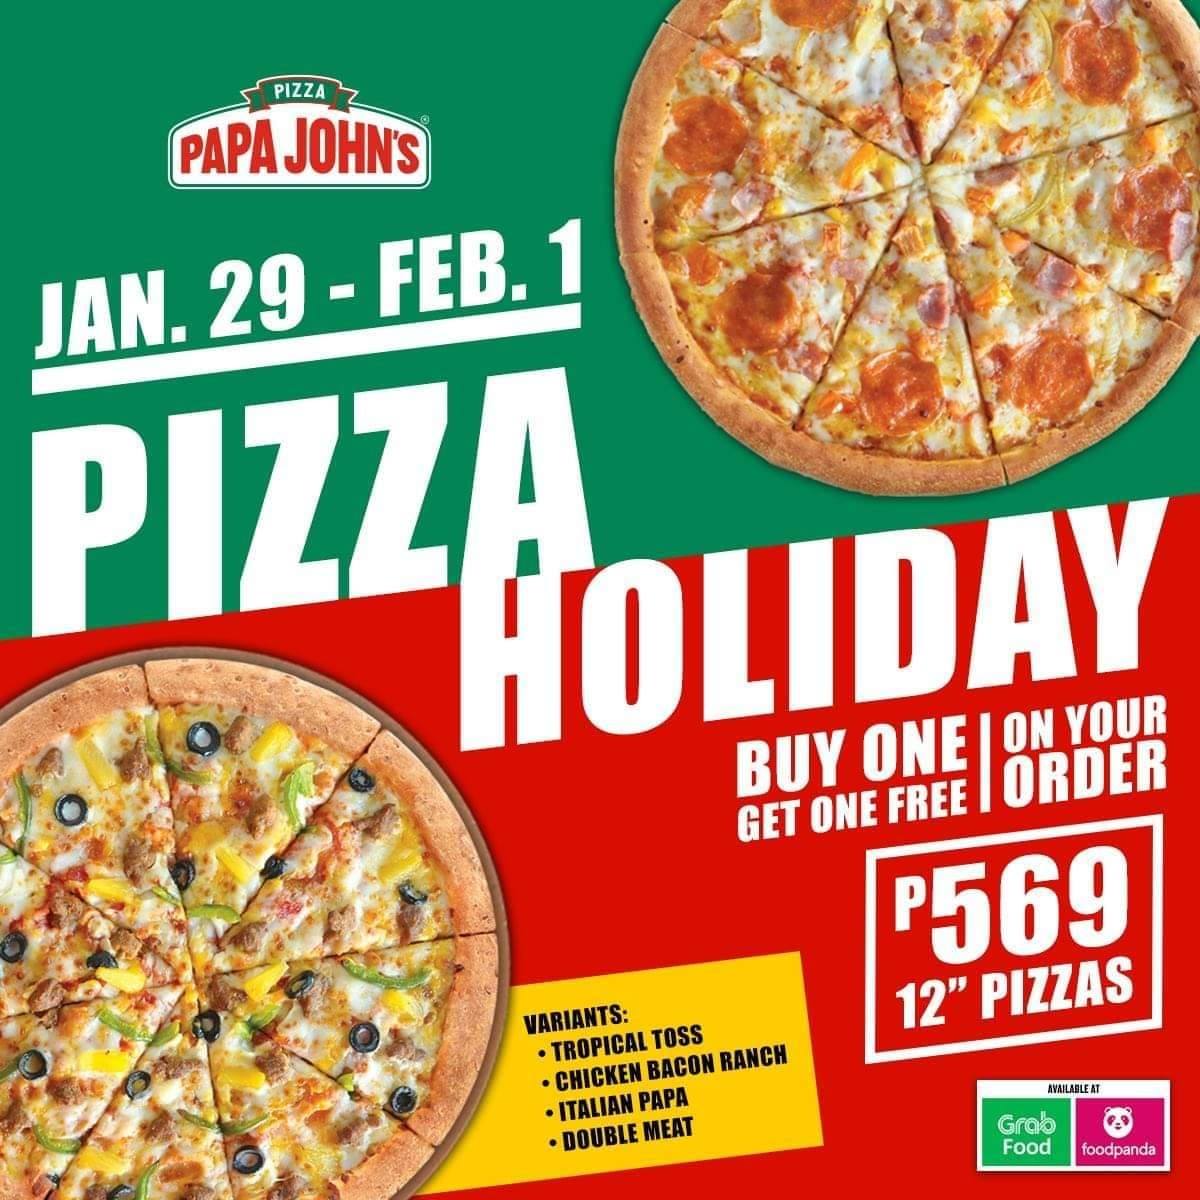 Papa Johns Pizza Pizza Holiday Buy 1 Get 1 for ₱569 Deals Pinoy